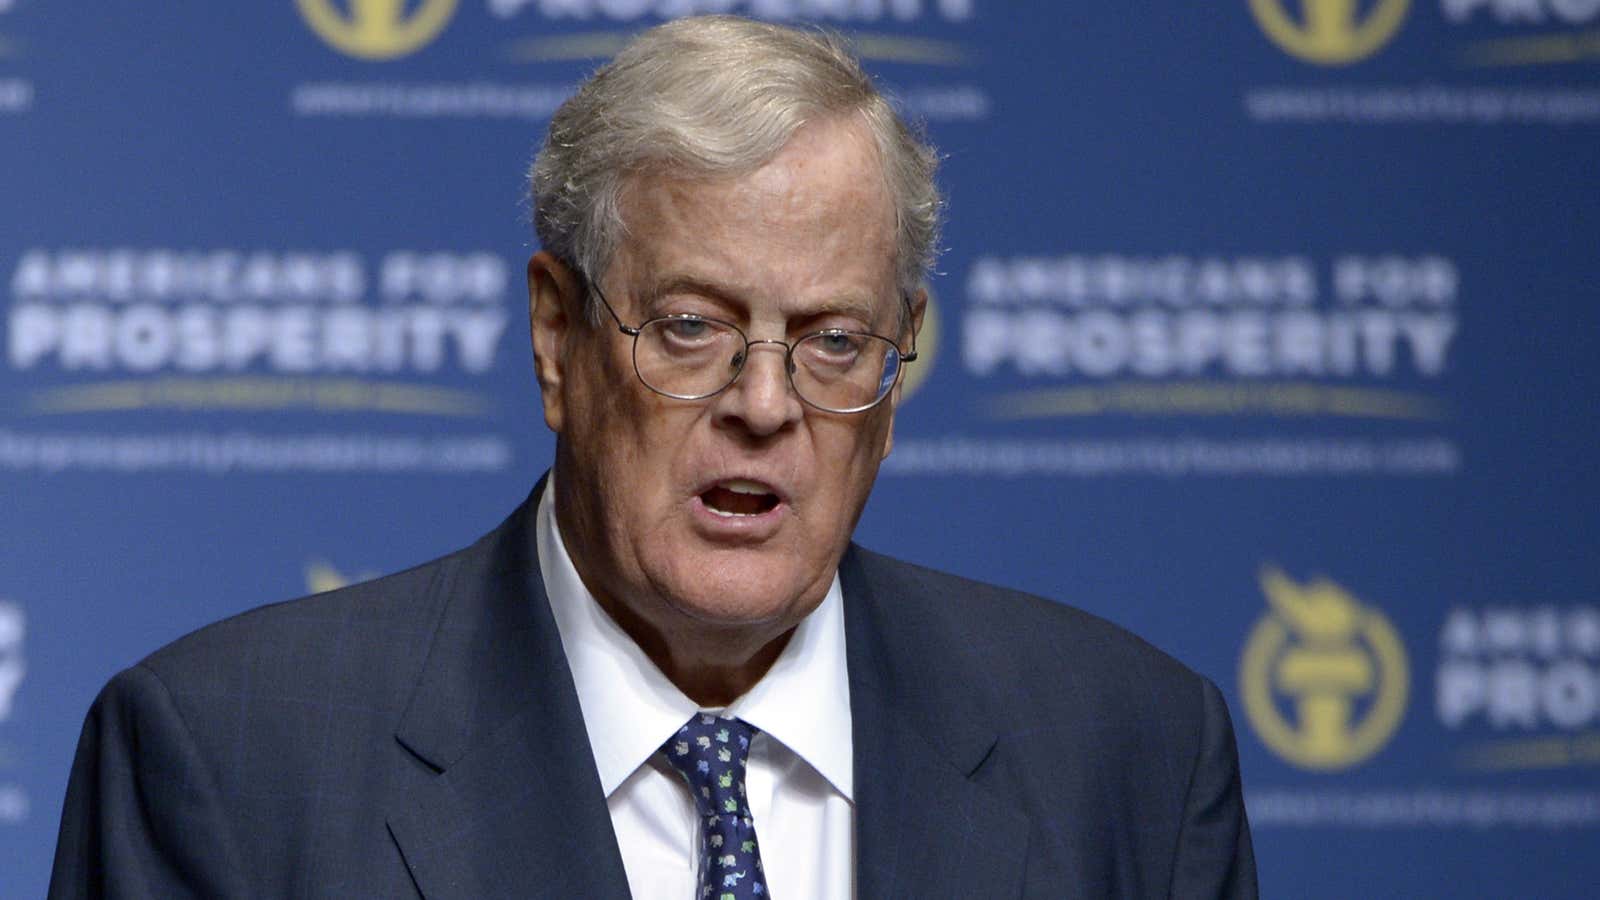 Problematic heritage for David Koch?